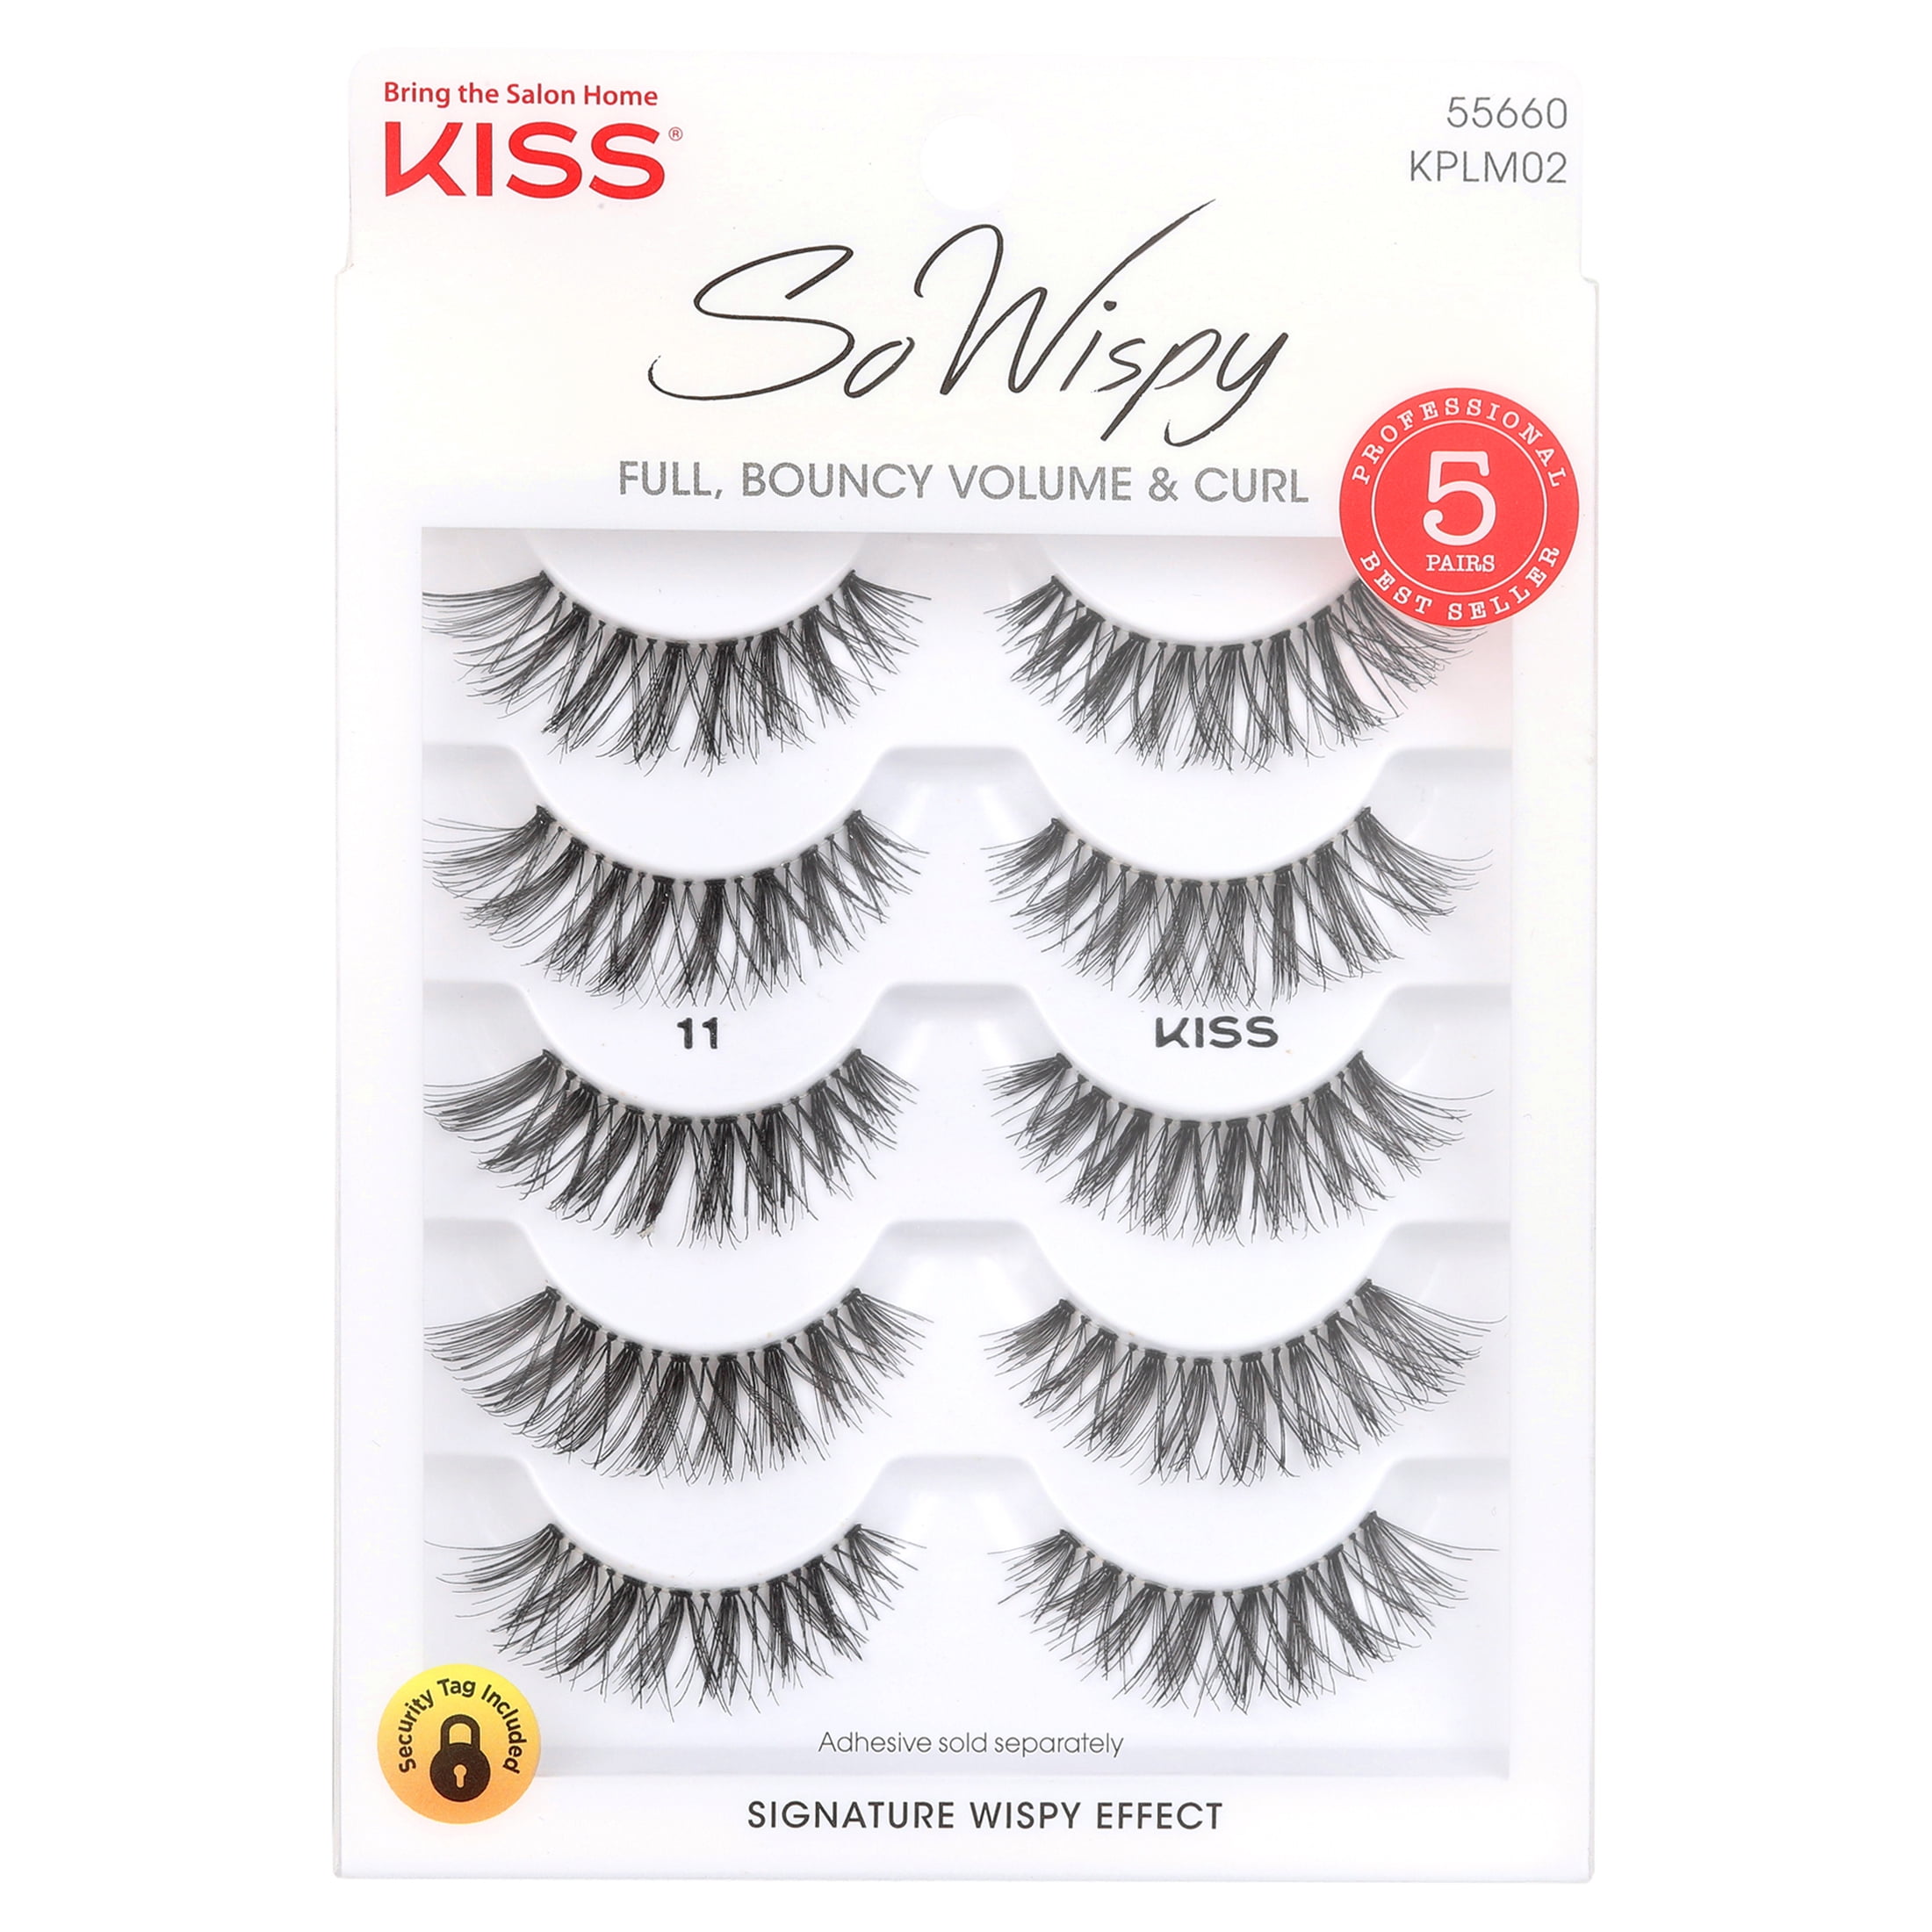  imPRESS KISS Falsies False Eyelashes, Lash Clusters, Natural',  12 mm, Includes 20 Clusters, 1 applicator, Contact Lens Friendly, Easy to  Apply, Reusable Strip Lashes : Beauty & Personal Care